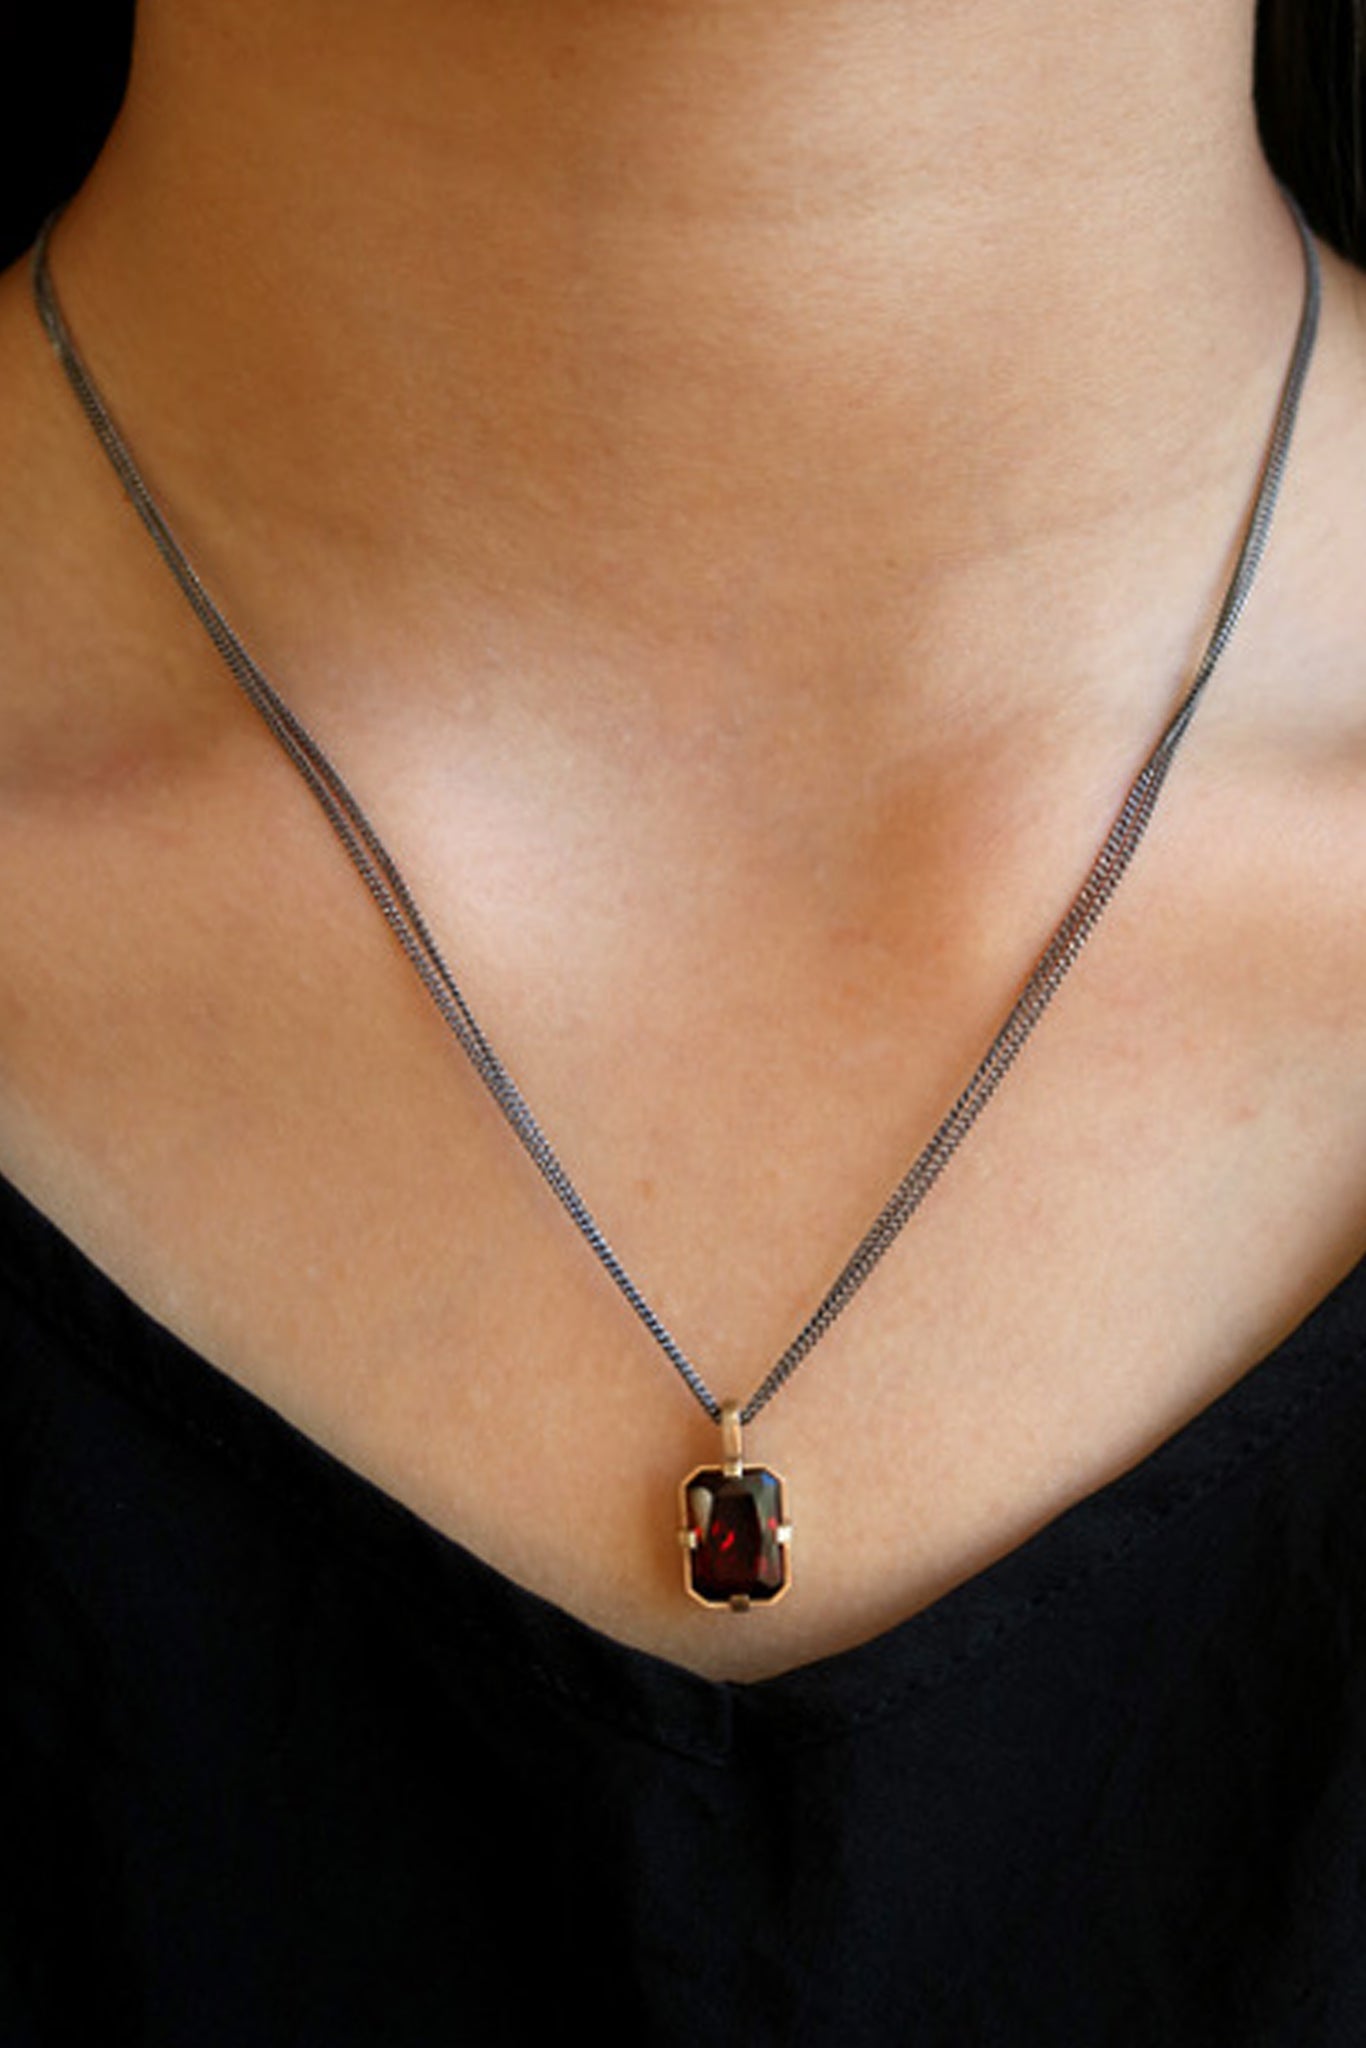 4.06ct Garnet in 9ct yellow gold necklace